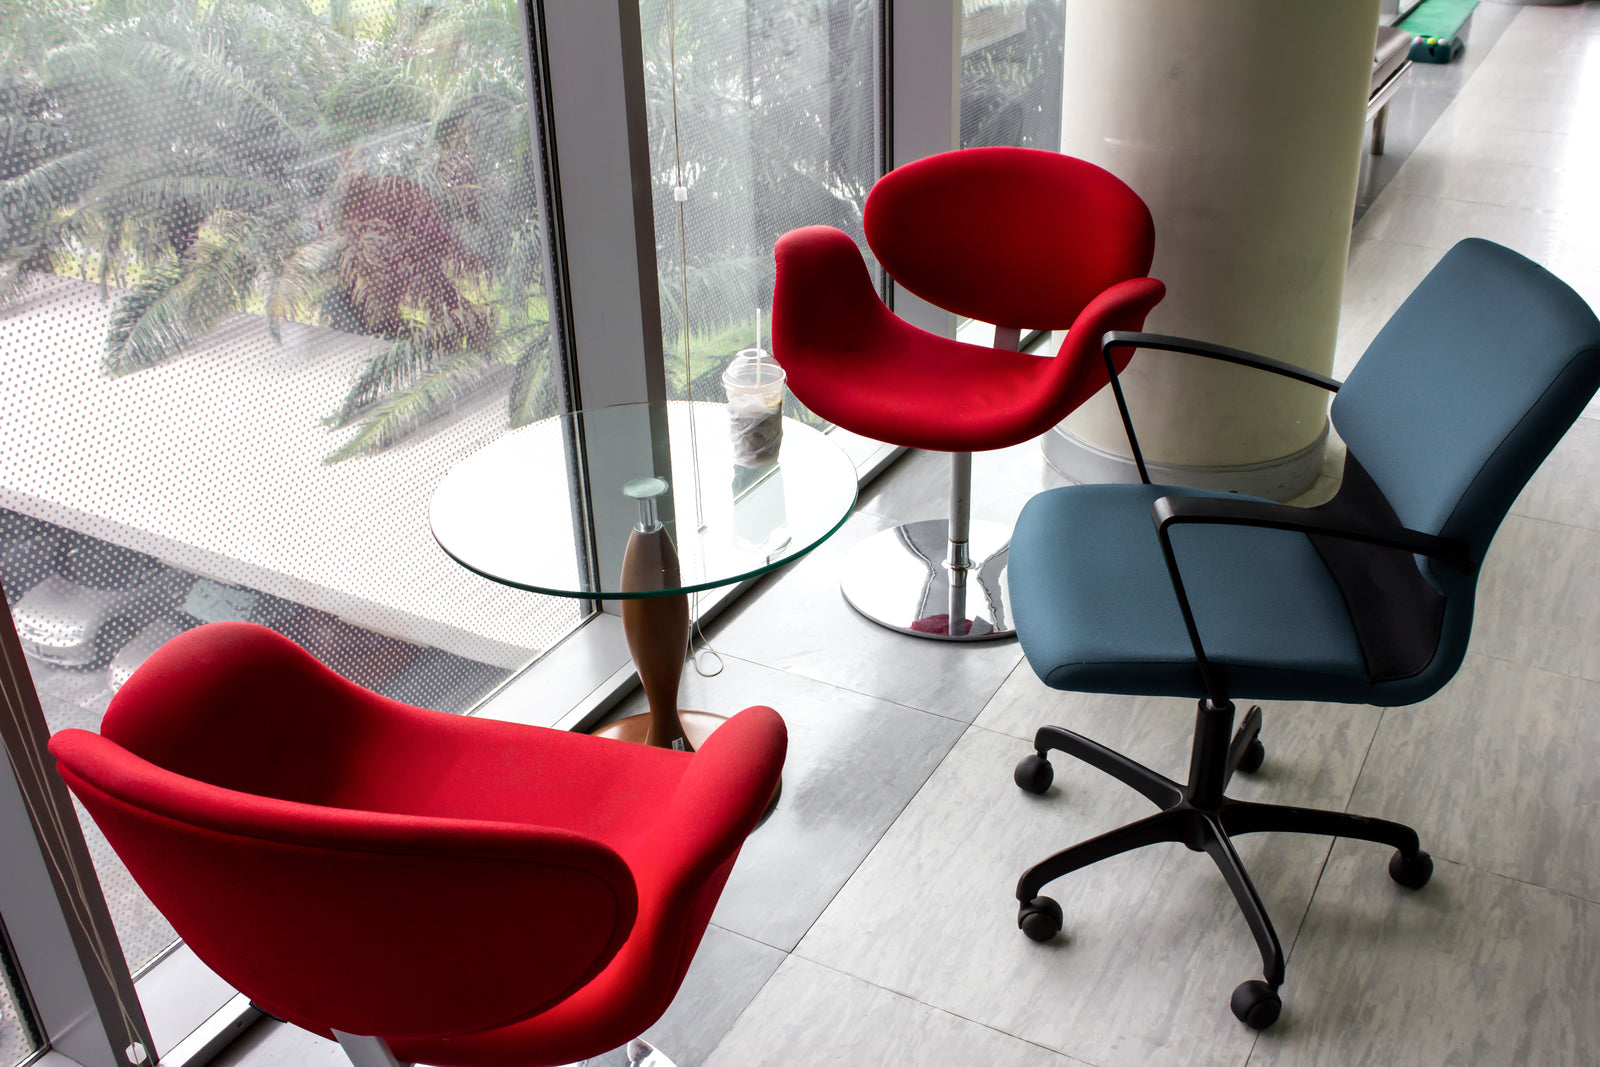 3 Essential Ergonomic Tips To Make Your Office Chair A Pleasure to Sit In | Sit Healthier